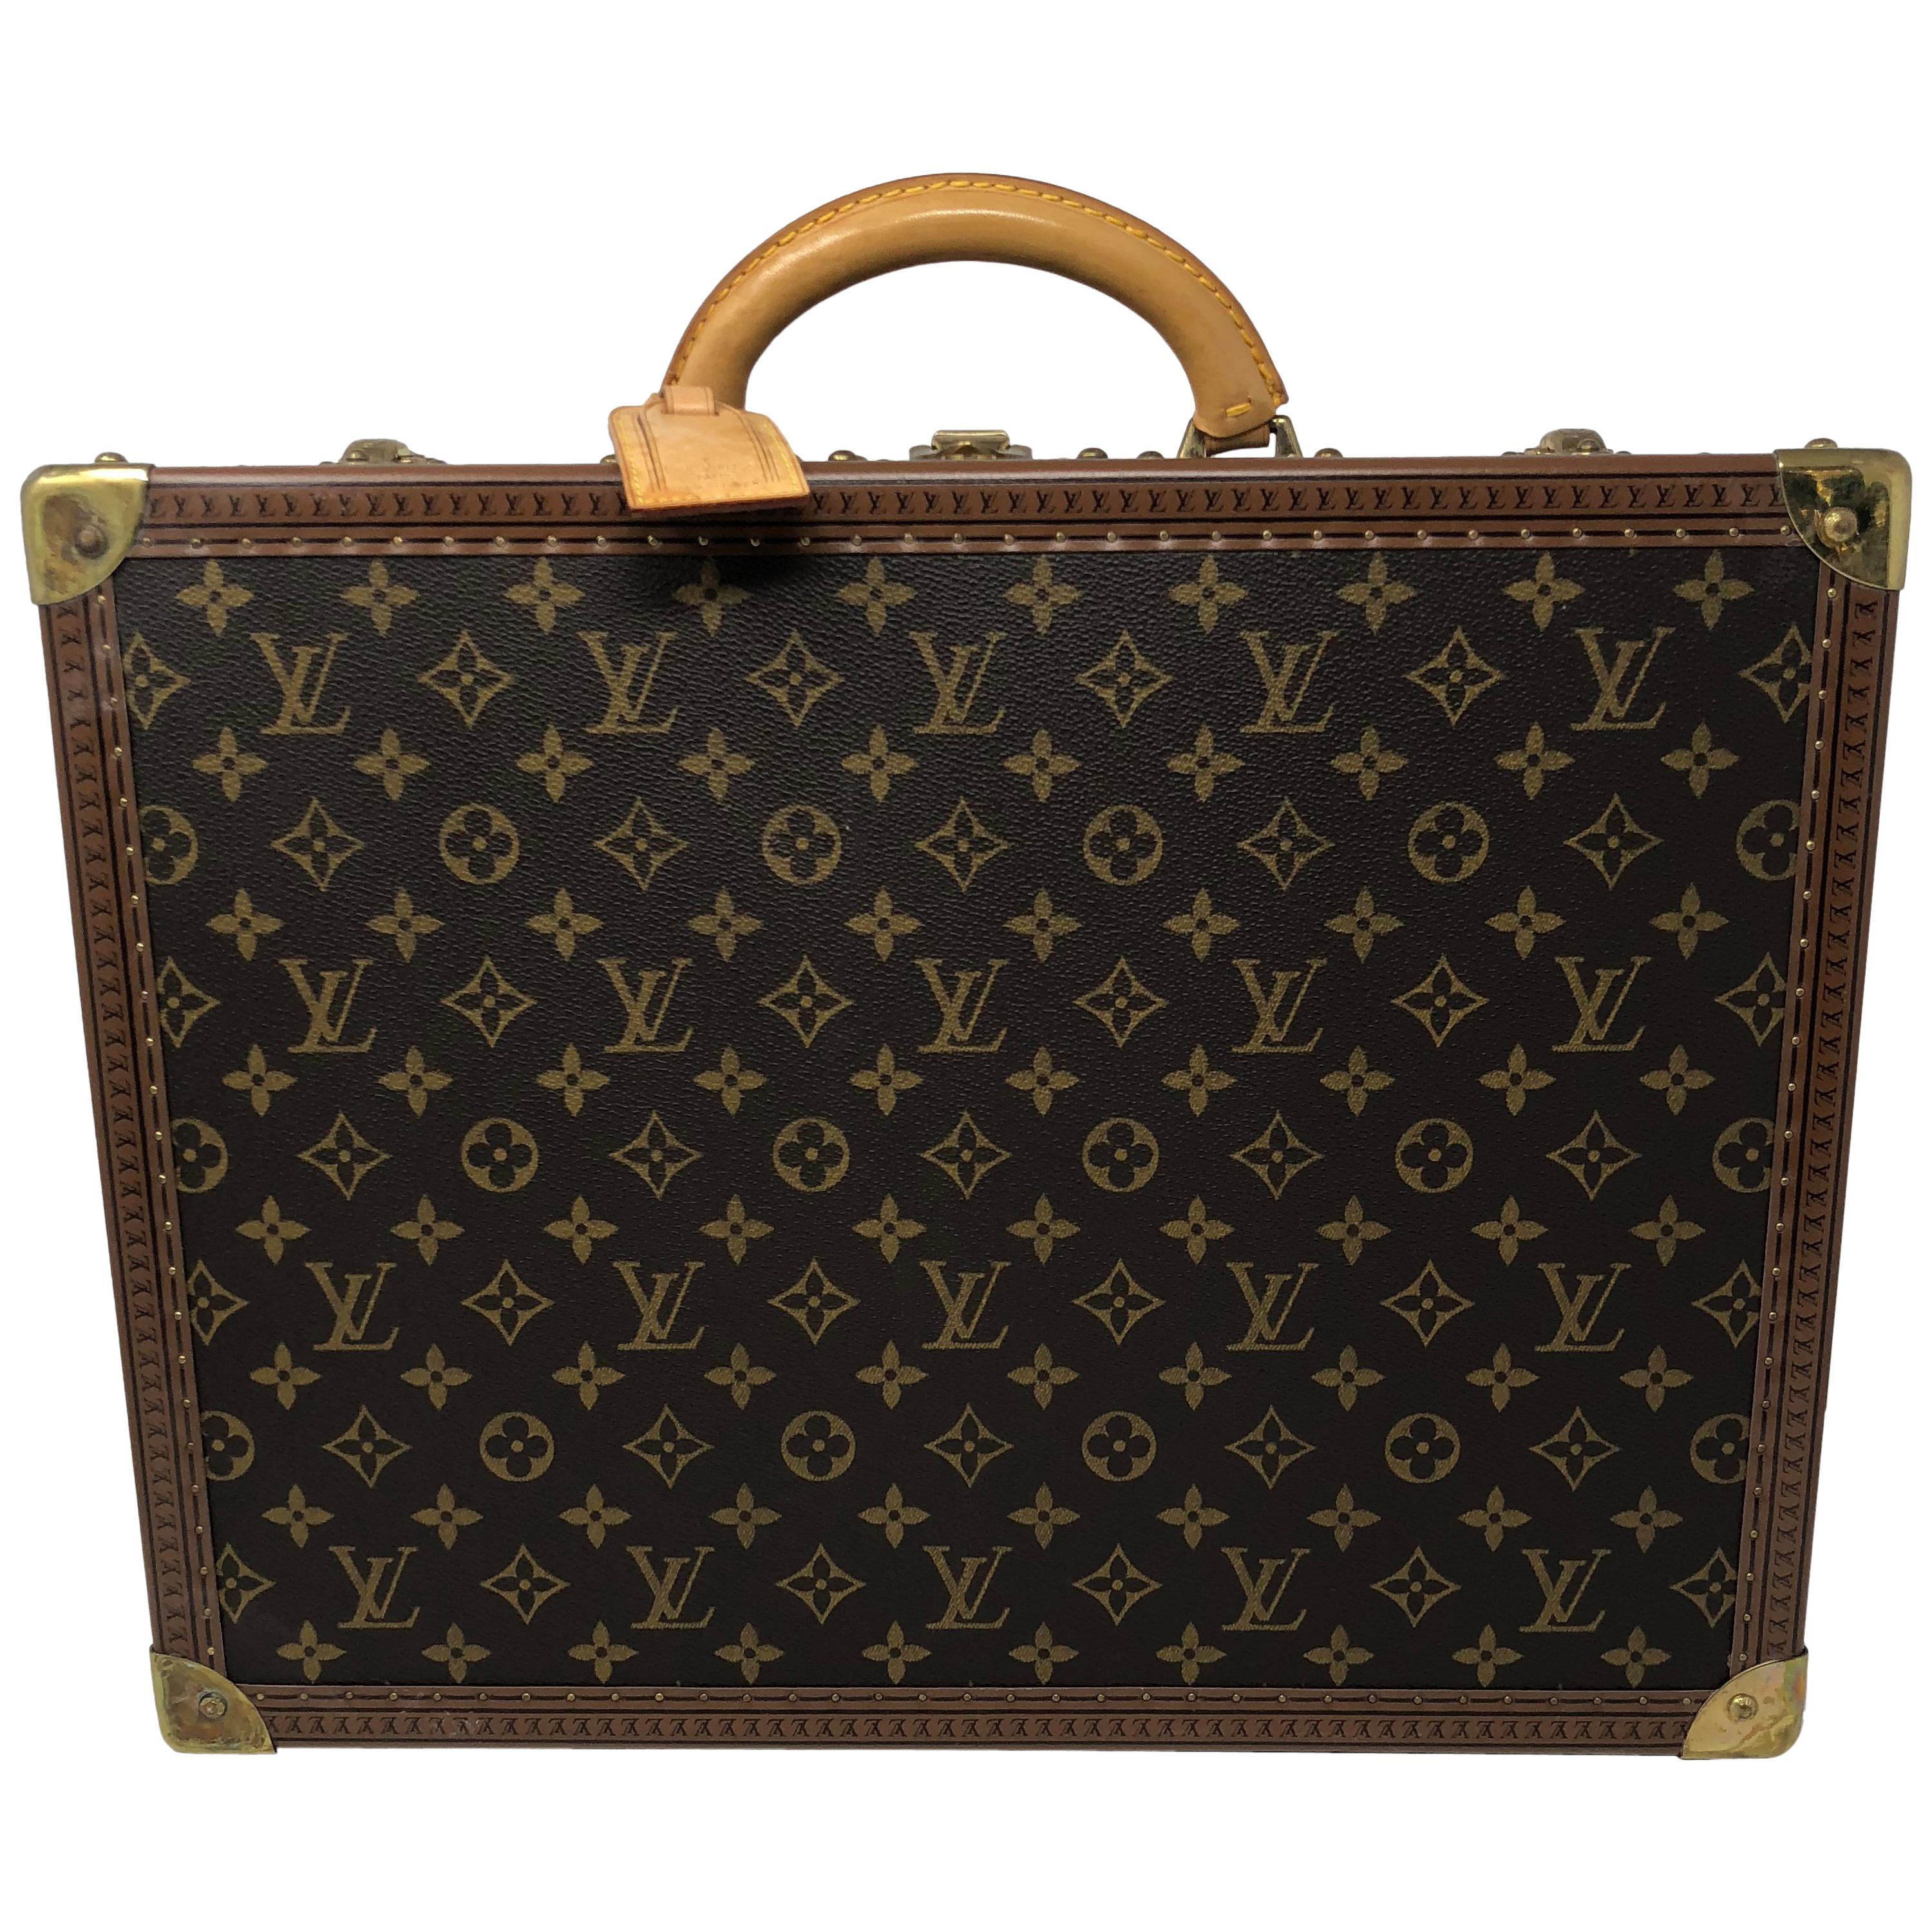 Louis Vuitton Cotteville 45 hard sided suitcase or briefcase